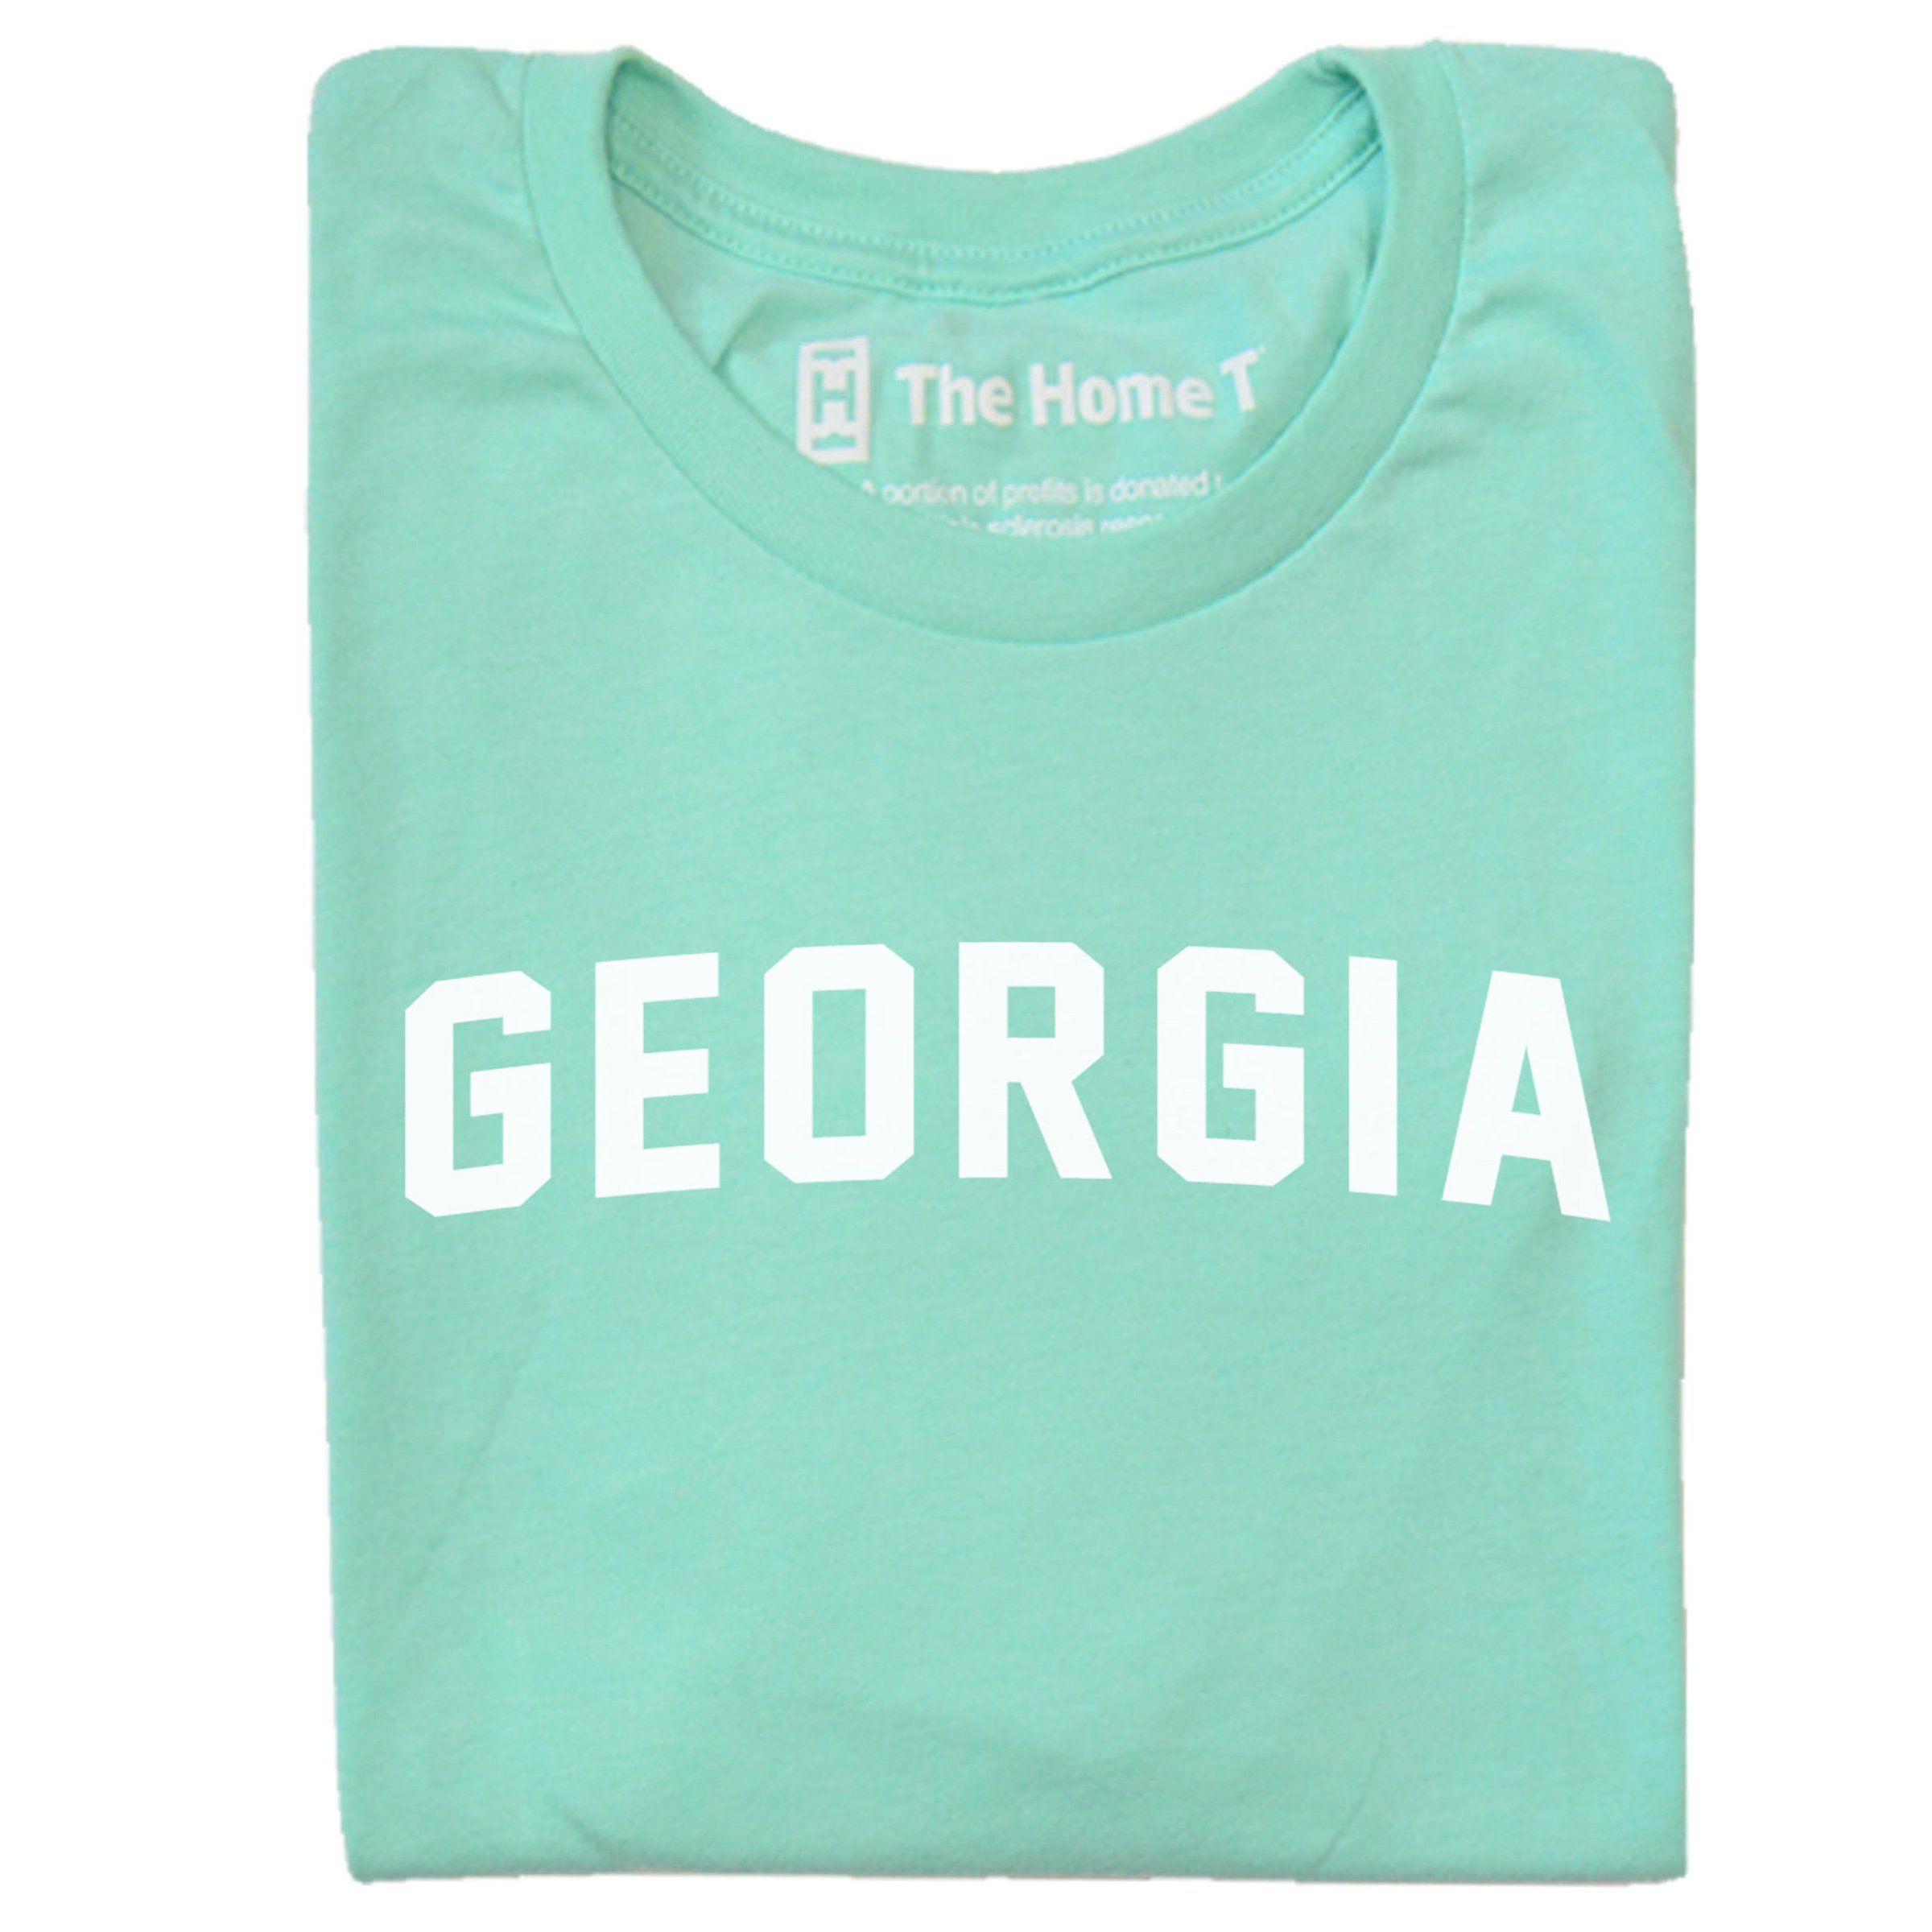 Georgia Arched The Home T XS Mint